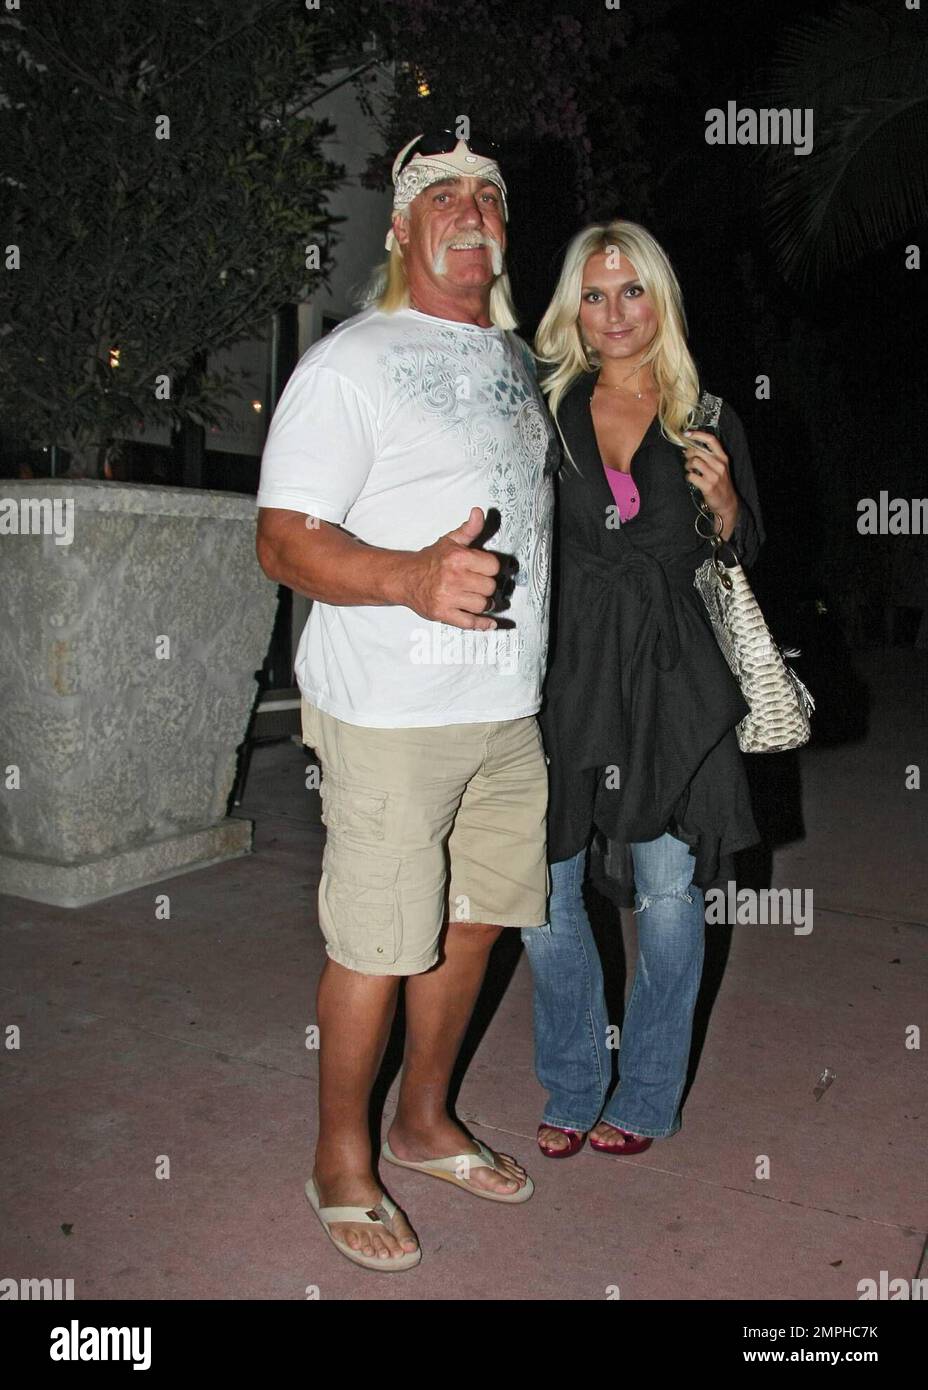 Exclusive!! Brooke Hogan, star of the VH1 TV show "Brooke Knows Best," and  her father, Hulk Hogan, leave a restaurant on South Beach in Miami Beach,  FL, 1/20/09 Stock Photo - Alamy